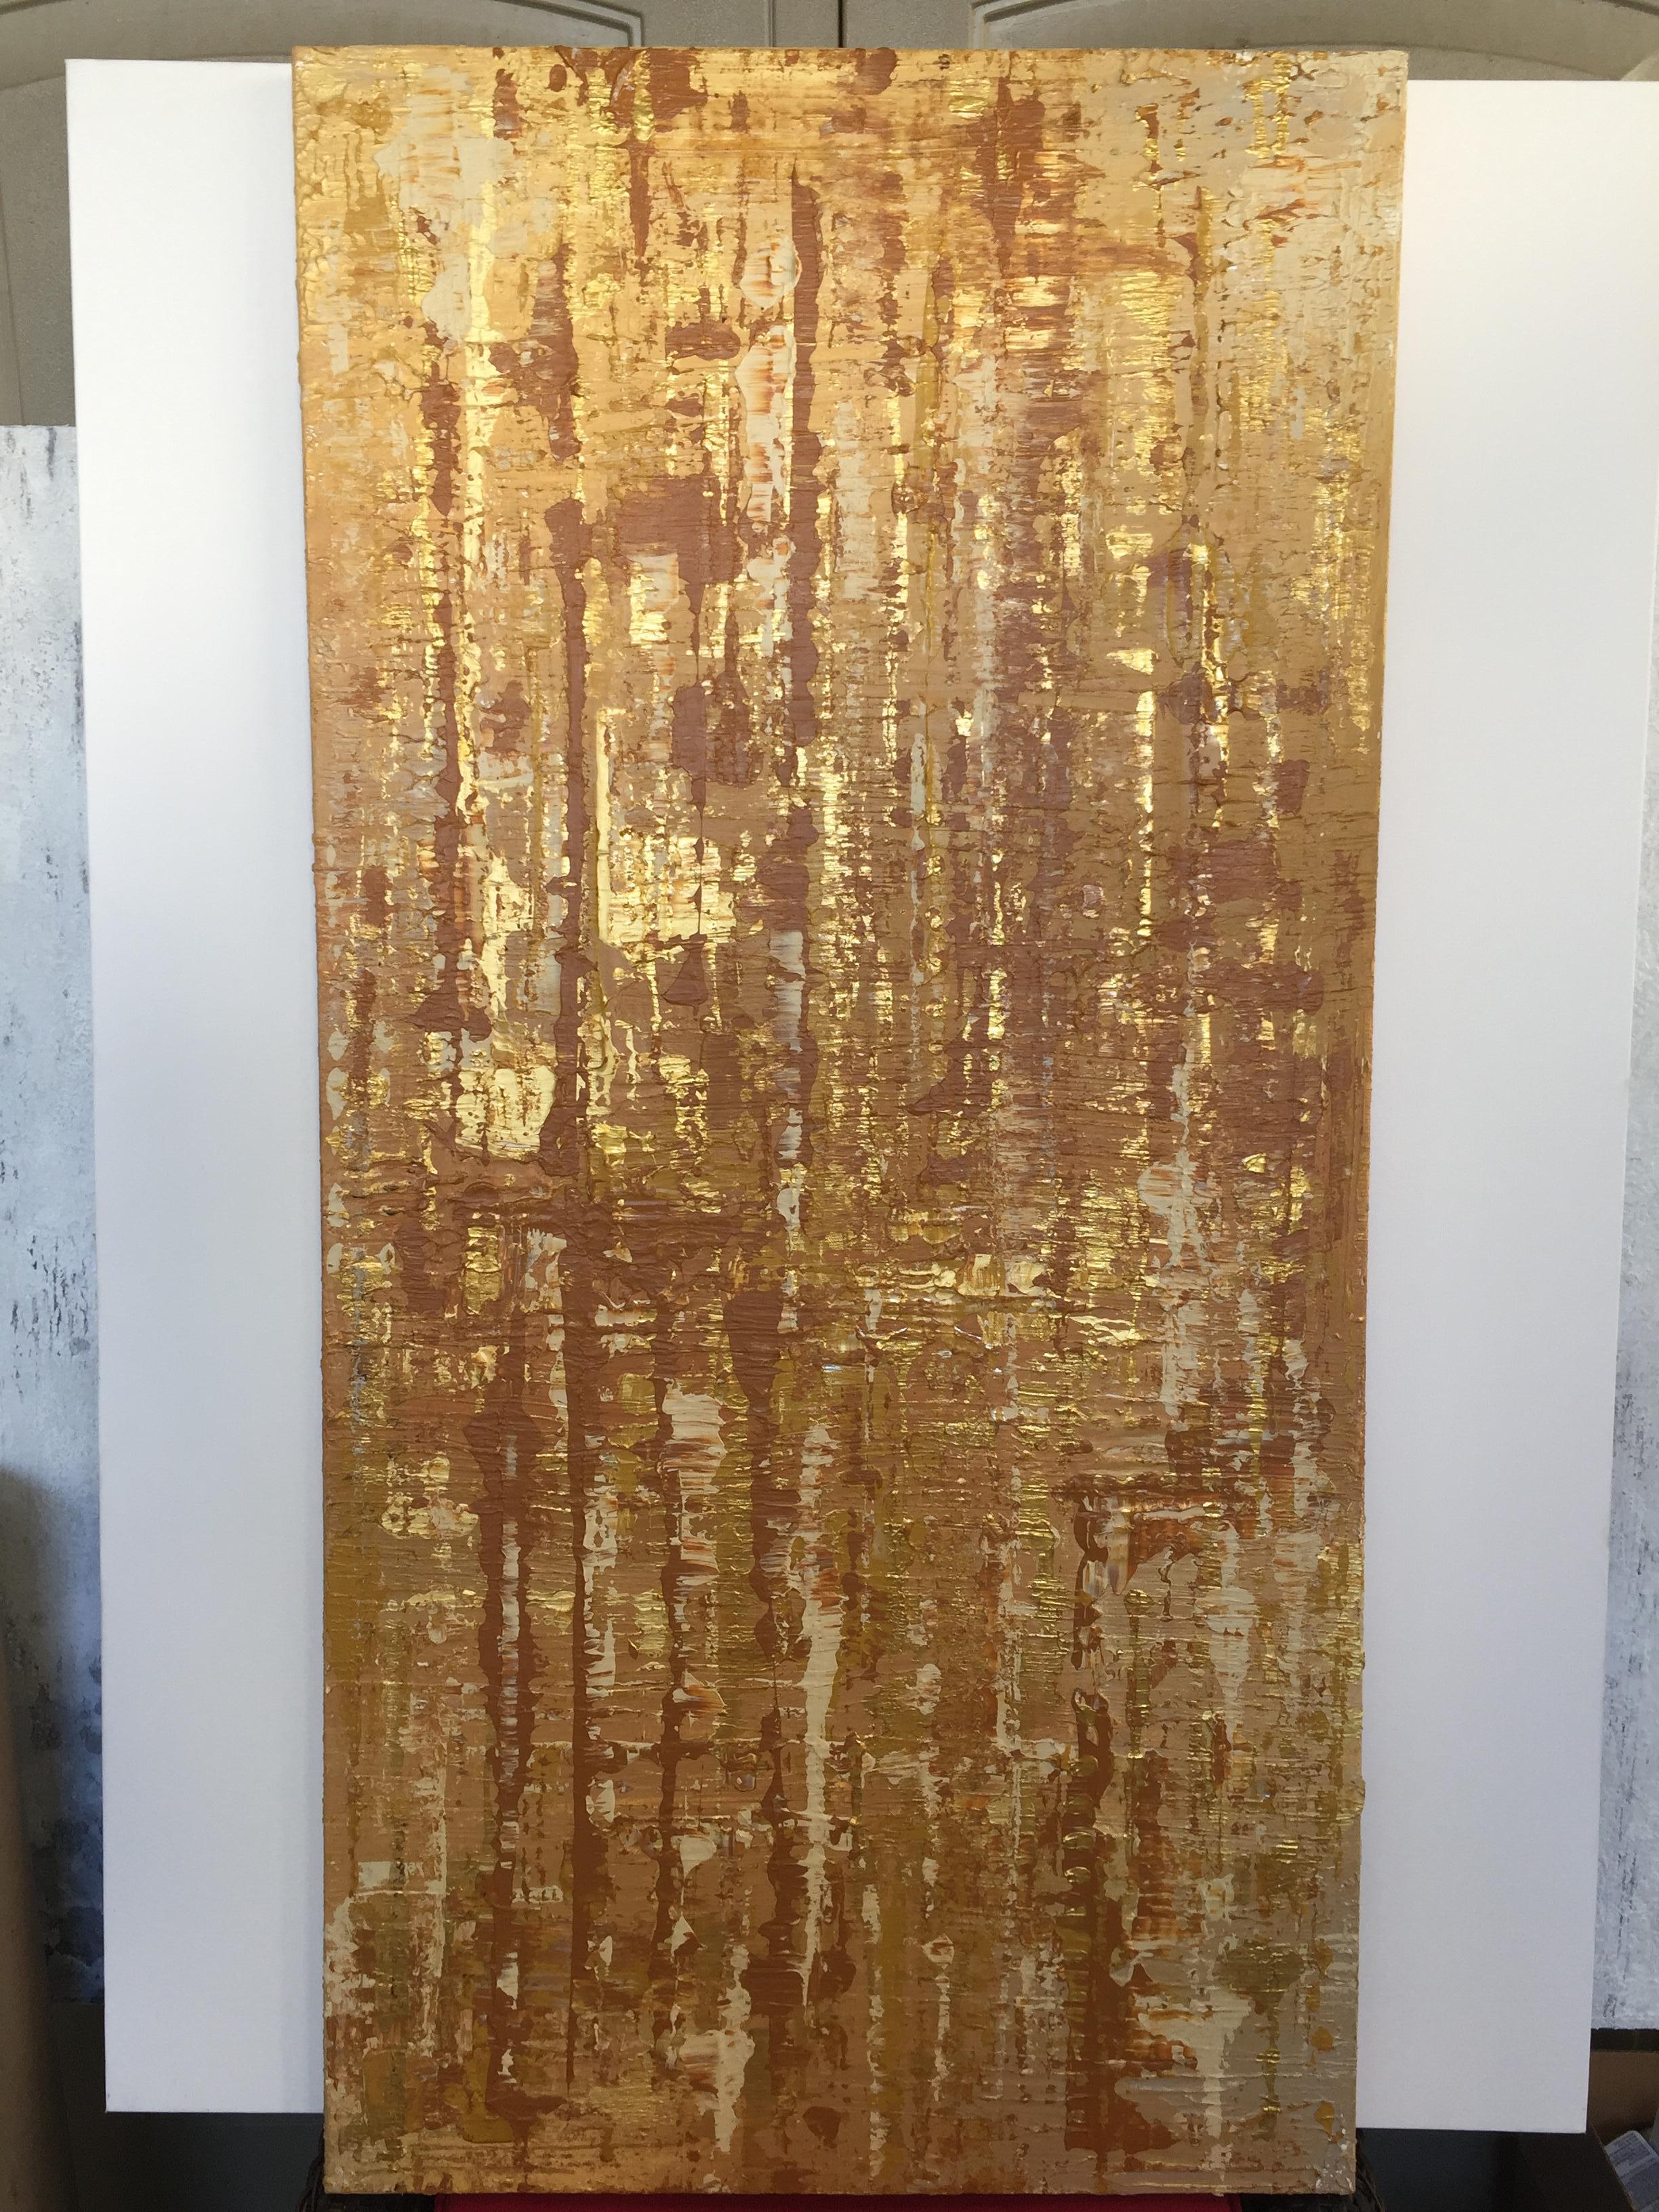 24 x 48” inches, Mixed
Media on Stretched Canvas:
Acrylic, Stucco, Modeling
Paste - Heavy Textured
2016 in Los Angeles, CA

TEXTURED ABSTRACT ART
Irena Orlov's textured abstract art is where my paintings really jump off the canvas, giving a new and